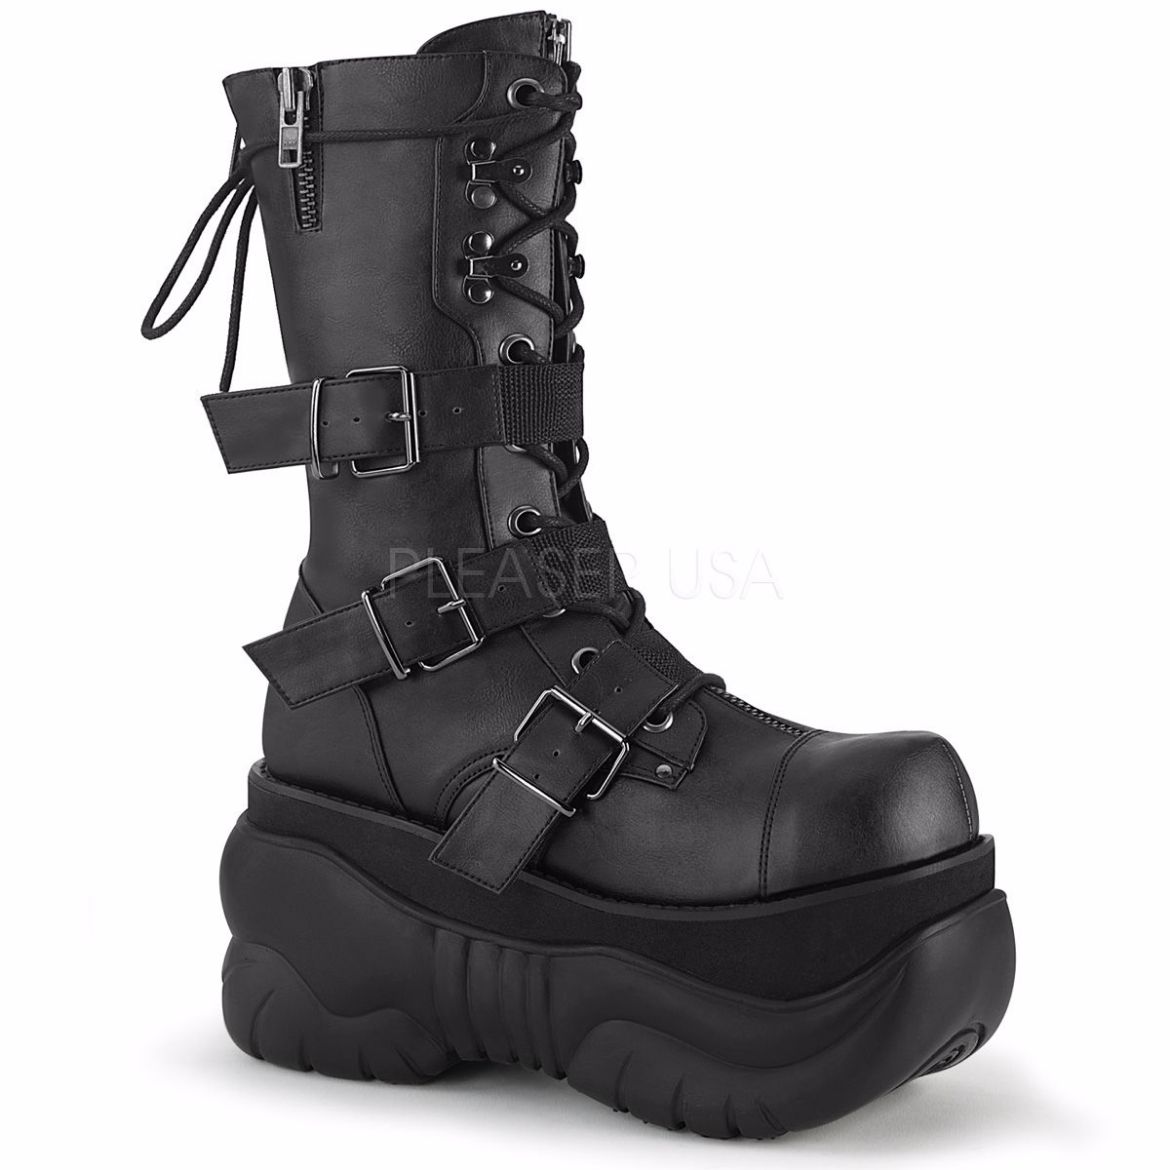 Product image of Demonia BOXER-230 Black Vegan Faux Leather 4 inch Platform Lace-Up  Mid Calf Boot Back Metal Zip